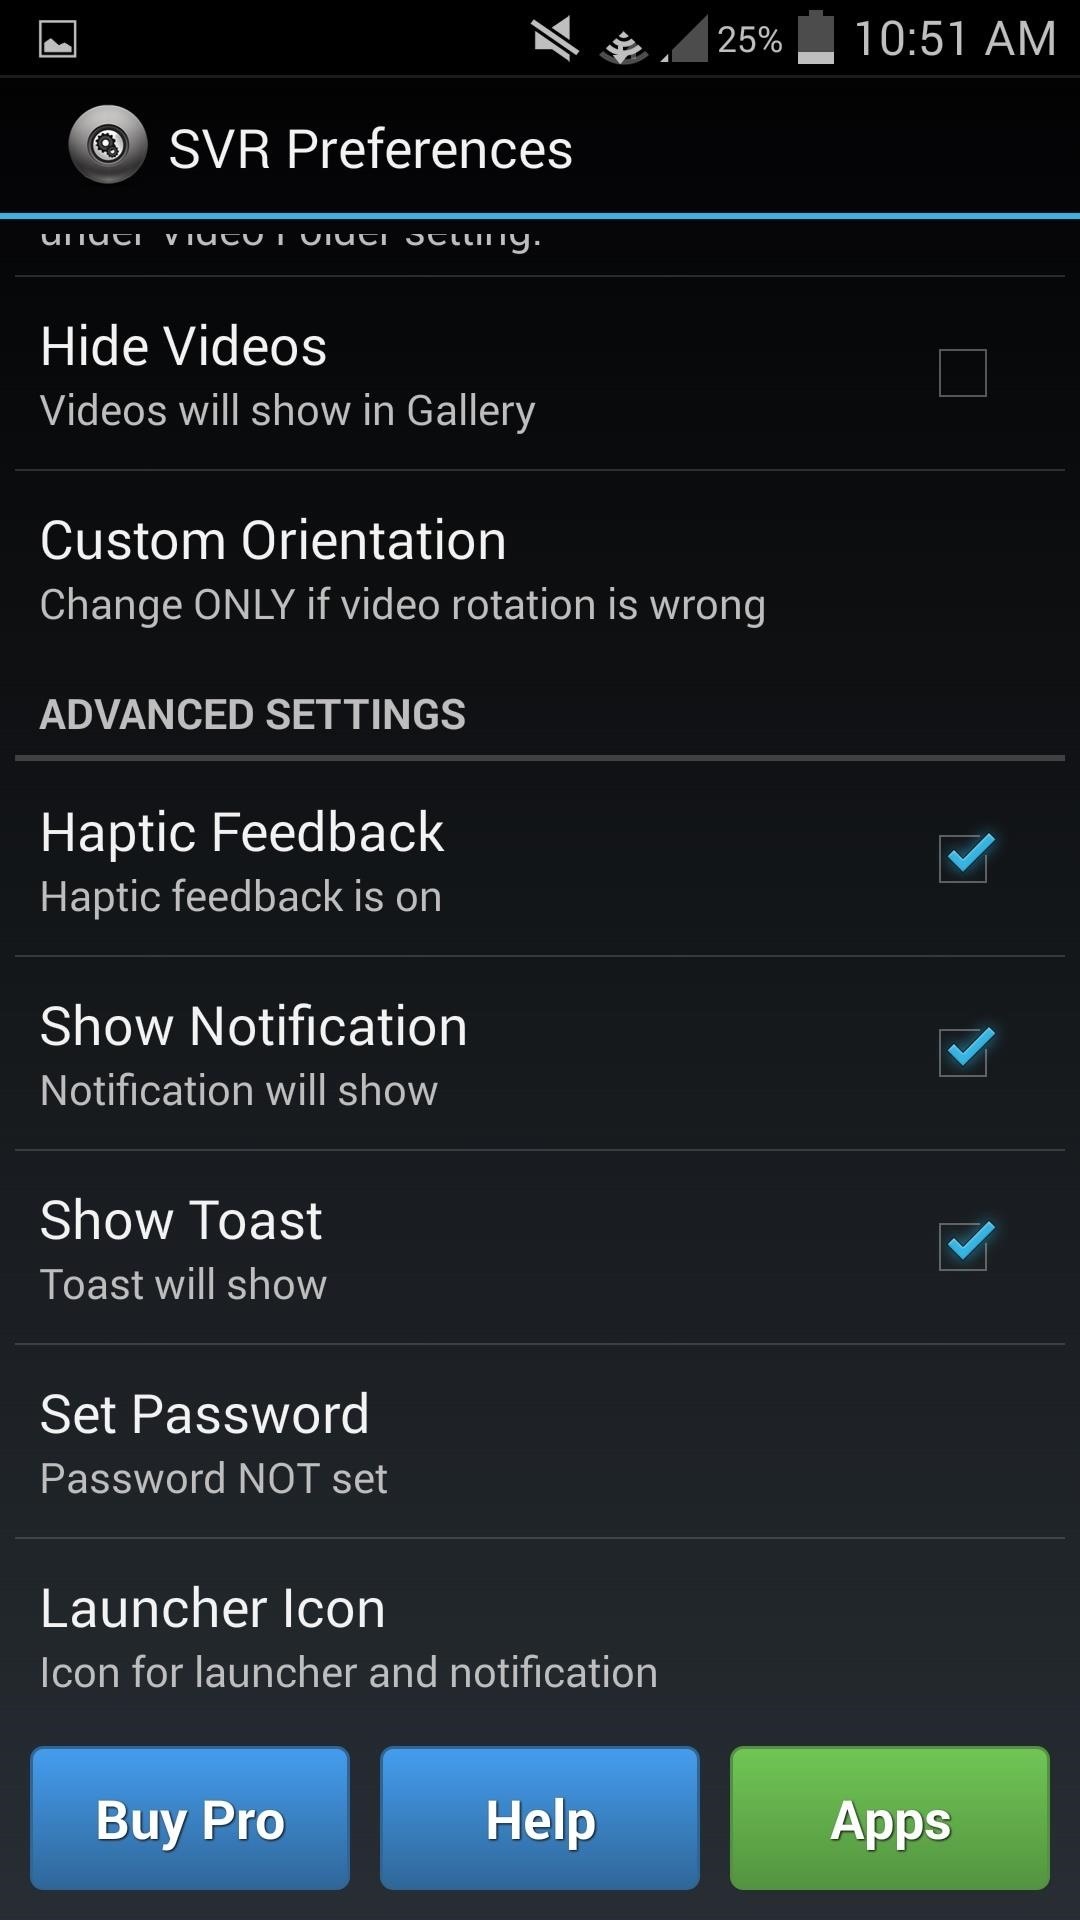 How to Secretly Record Videos Using the Volume Keys on Your Galaxy S4 or Other Android Phone